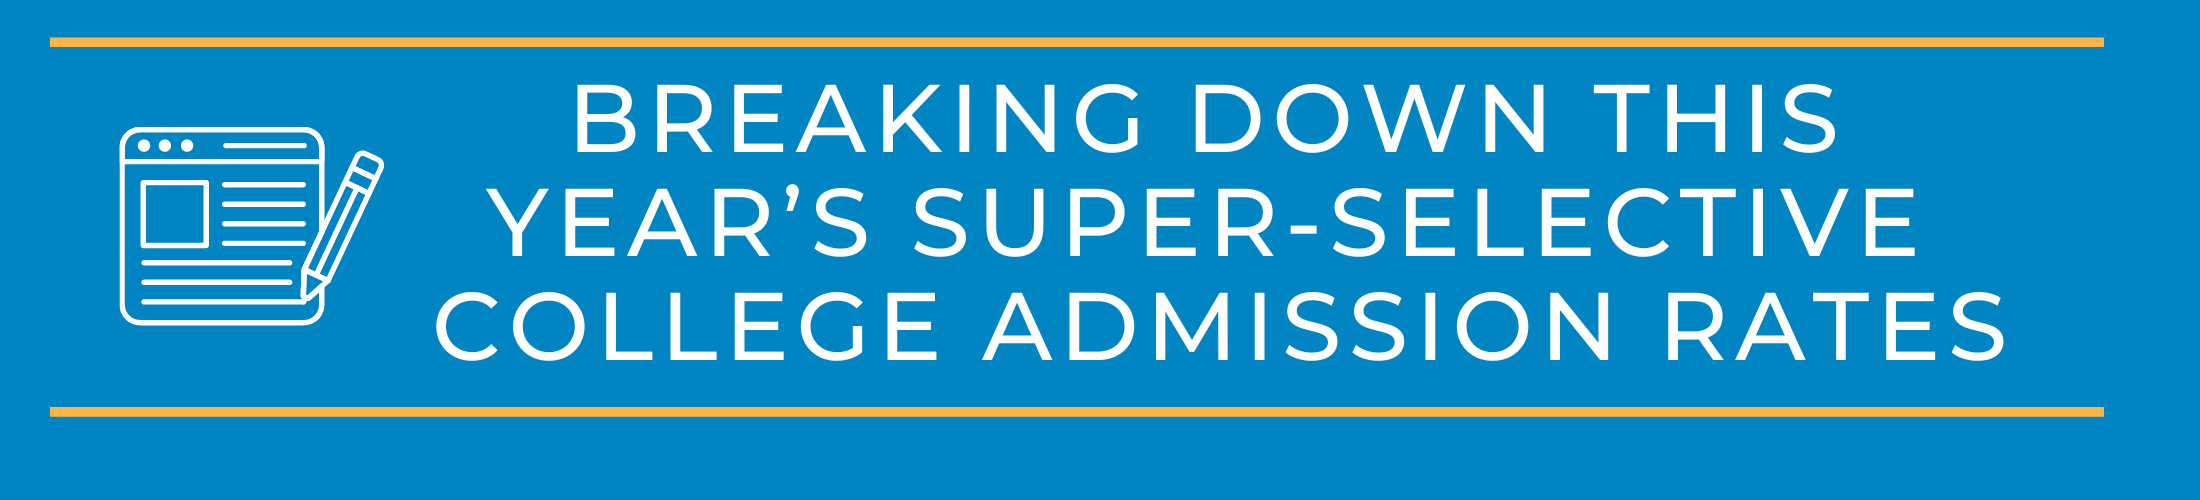 Breaking Down This Year’s Super-Selective College Admission Rates